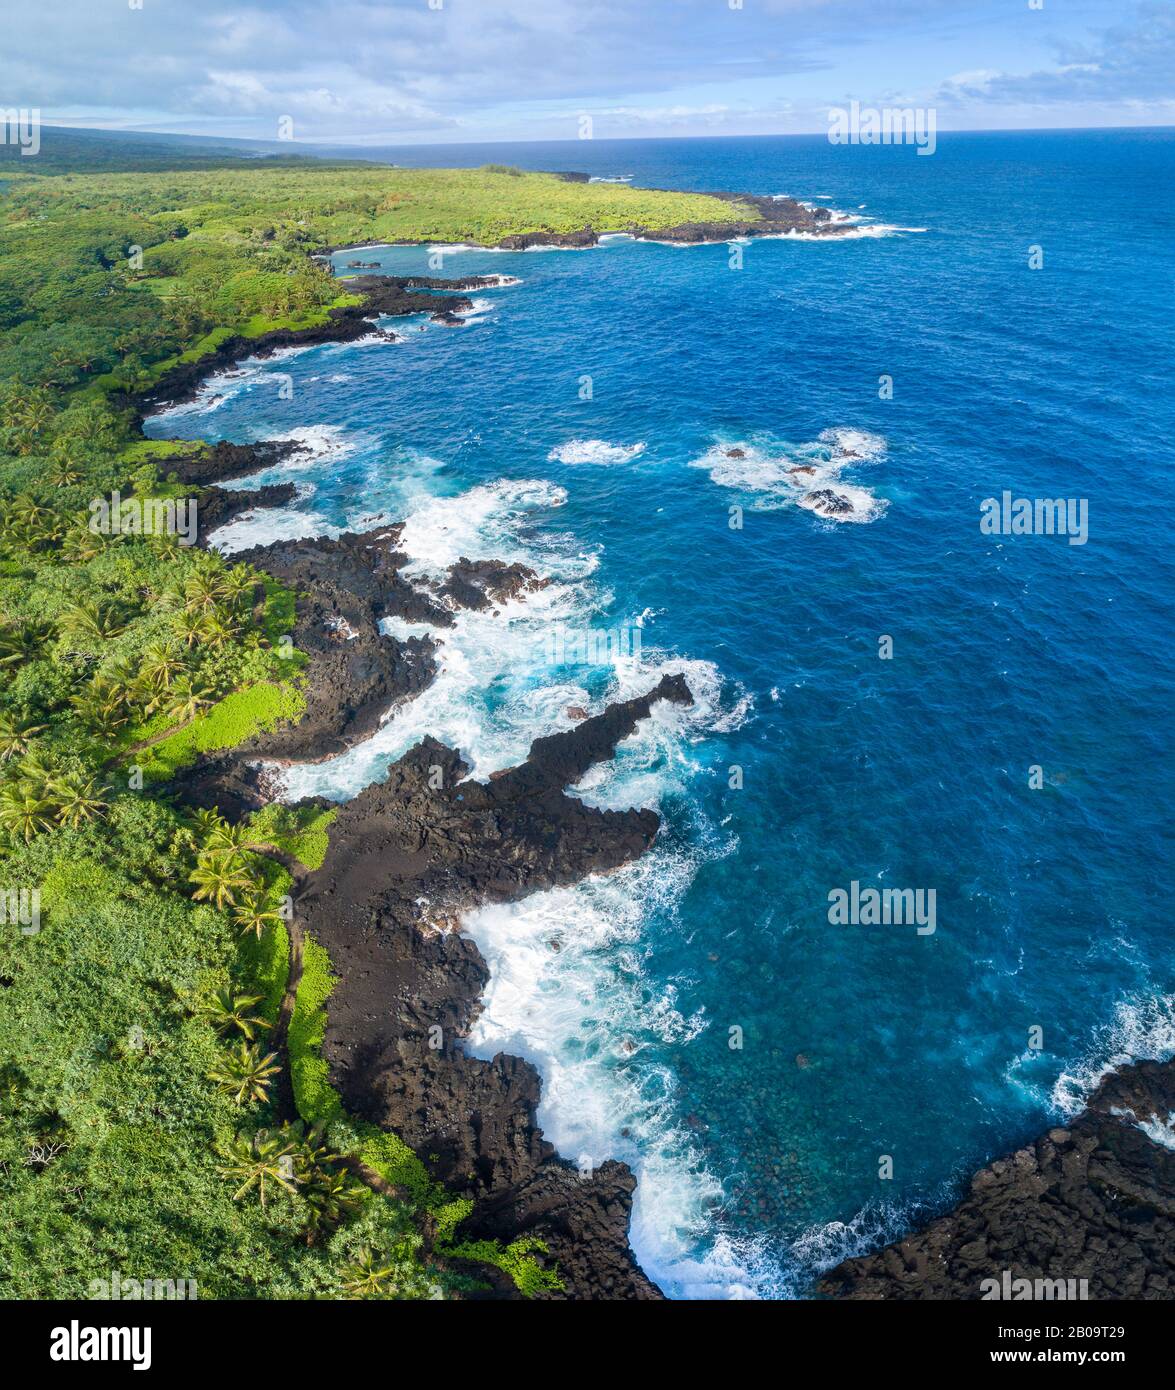 An aerial view of the coastline at Waianapanapa State Park, Hana, Maui, Hawaii. The famous black sand beach is in the bay at the top of the frame. Fiv Stock Photo